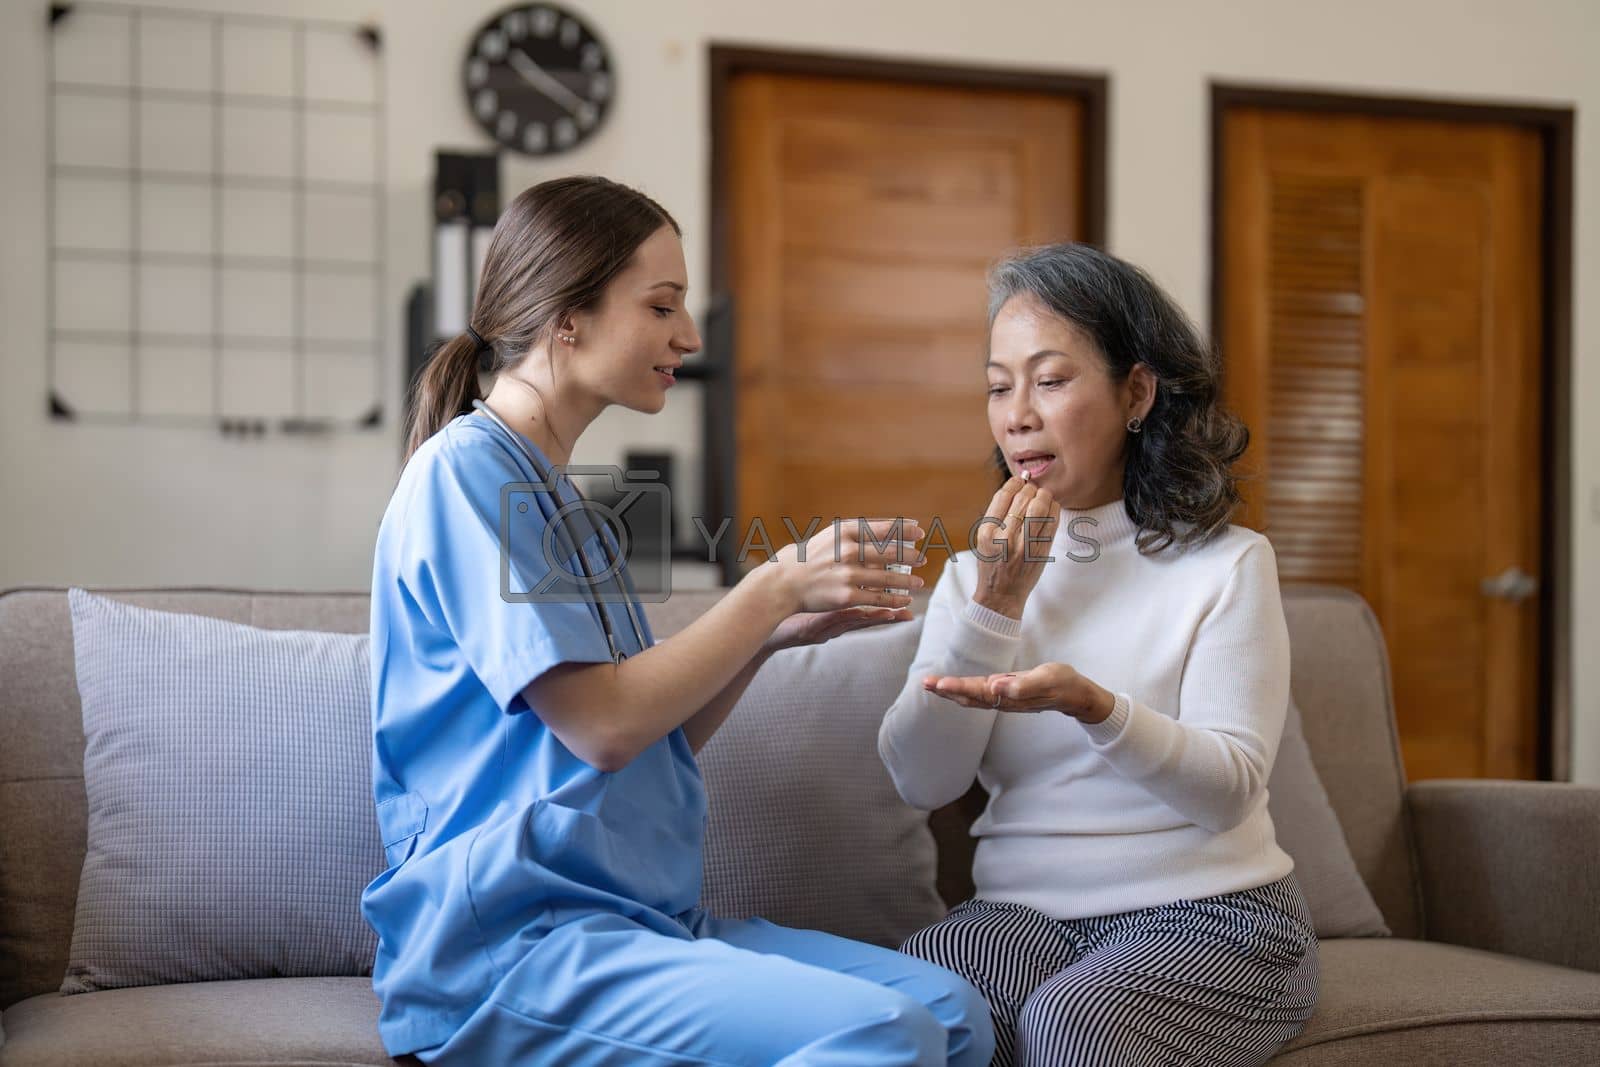 Royalty free image of Contented senior woman taking medicines while her caregiver advising her medication. Medication for seniors, nursing house, healthcare at home by nateemee